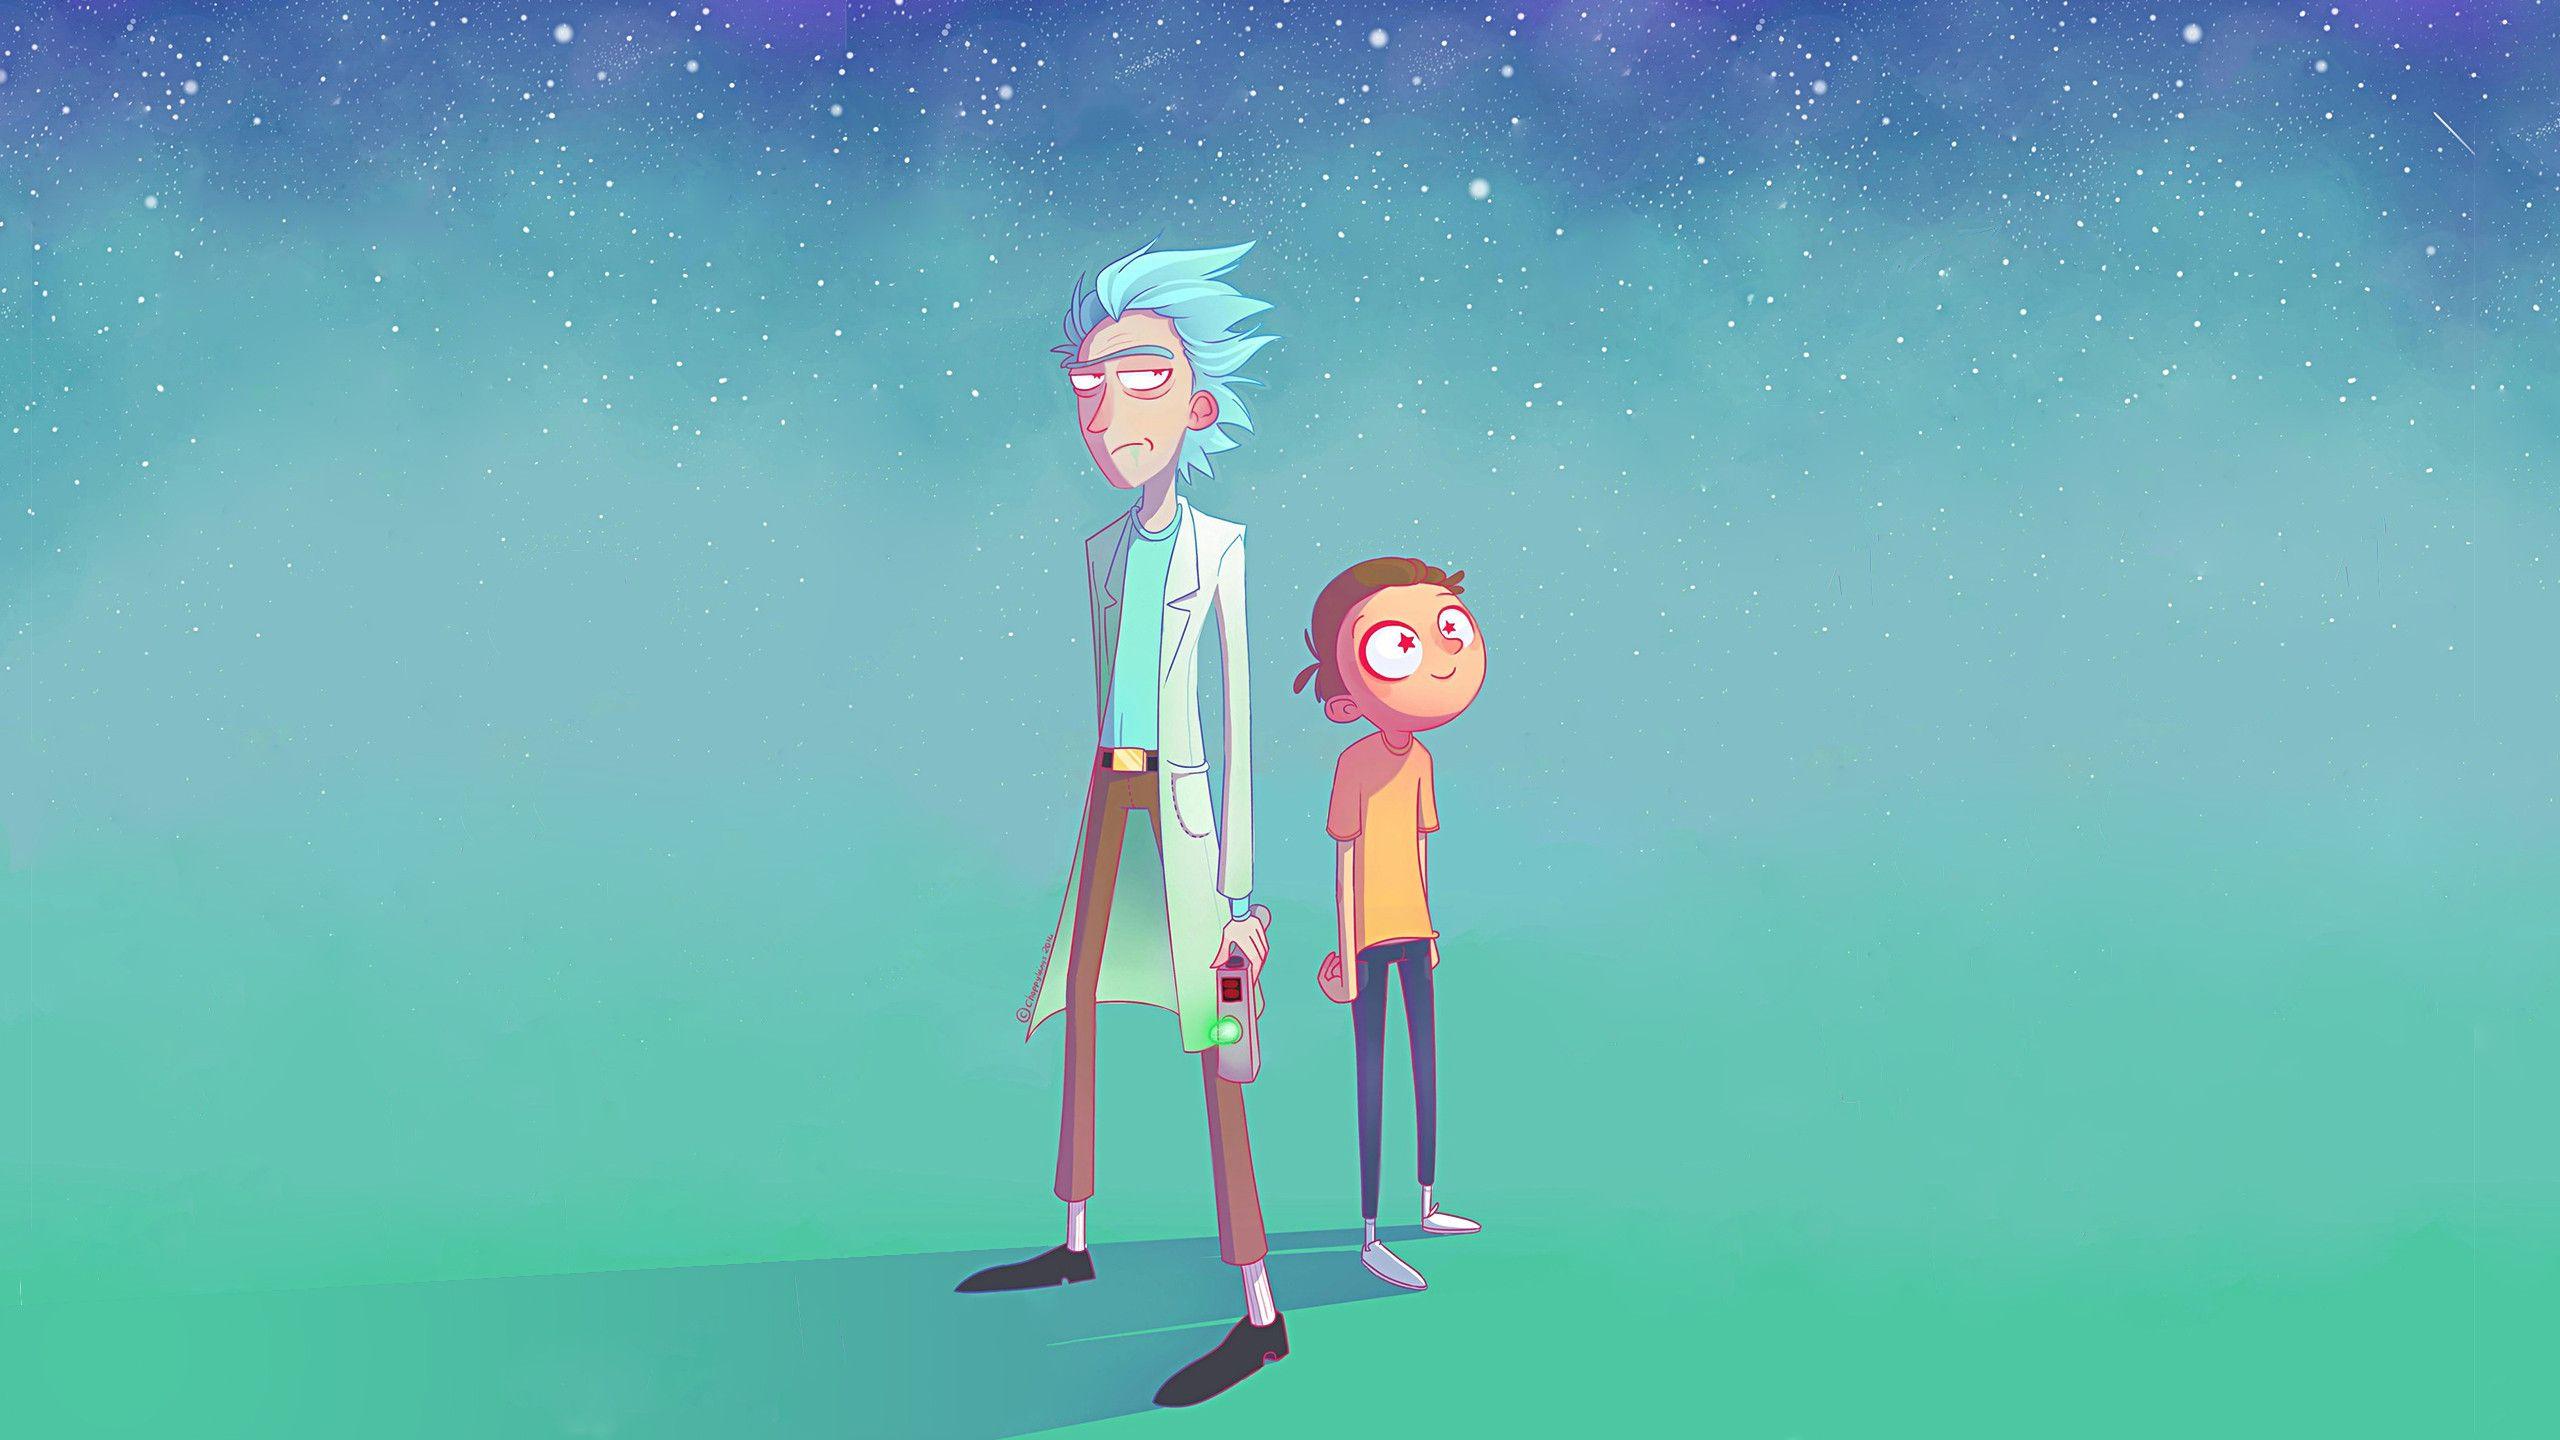 Rick and Morty Kind of Return in a Brutal AnimeInspired Short   Okayplayer